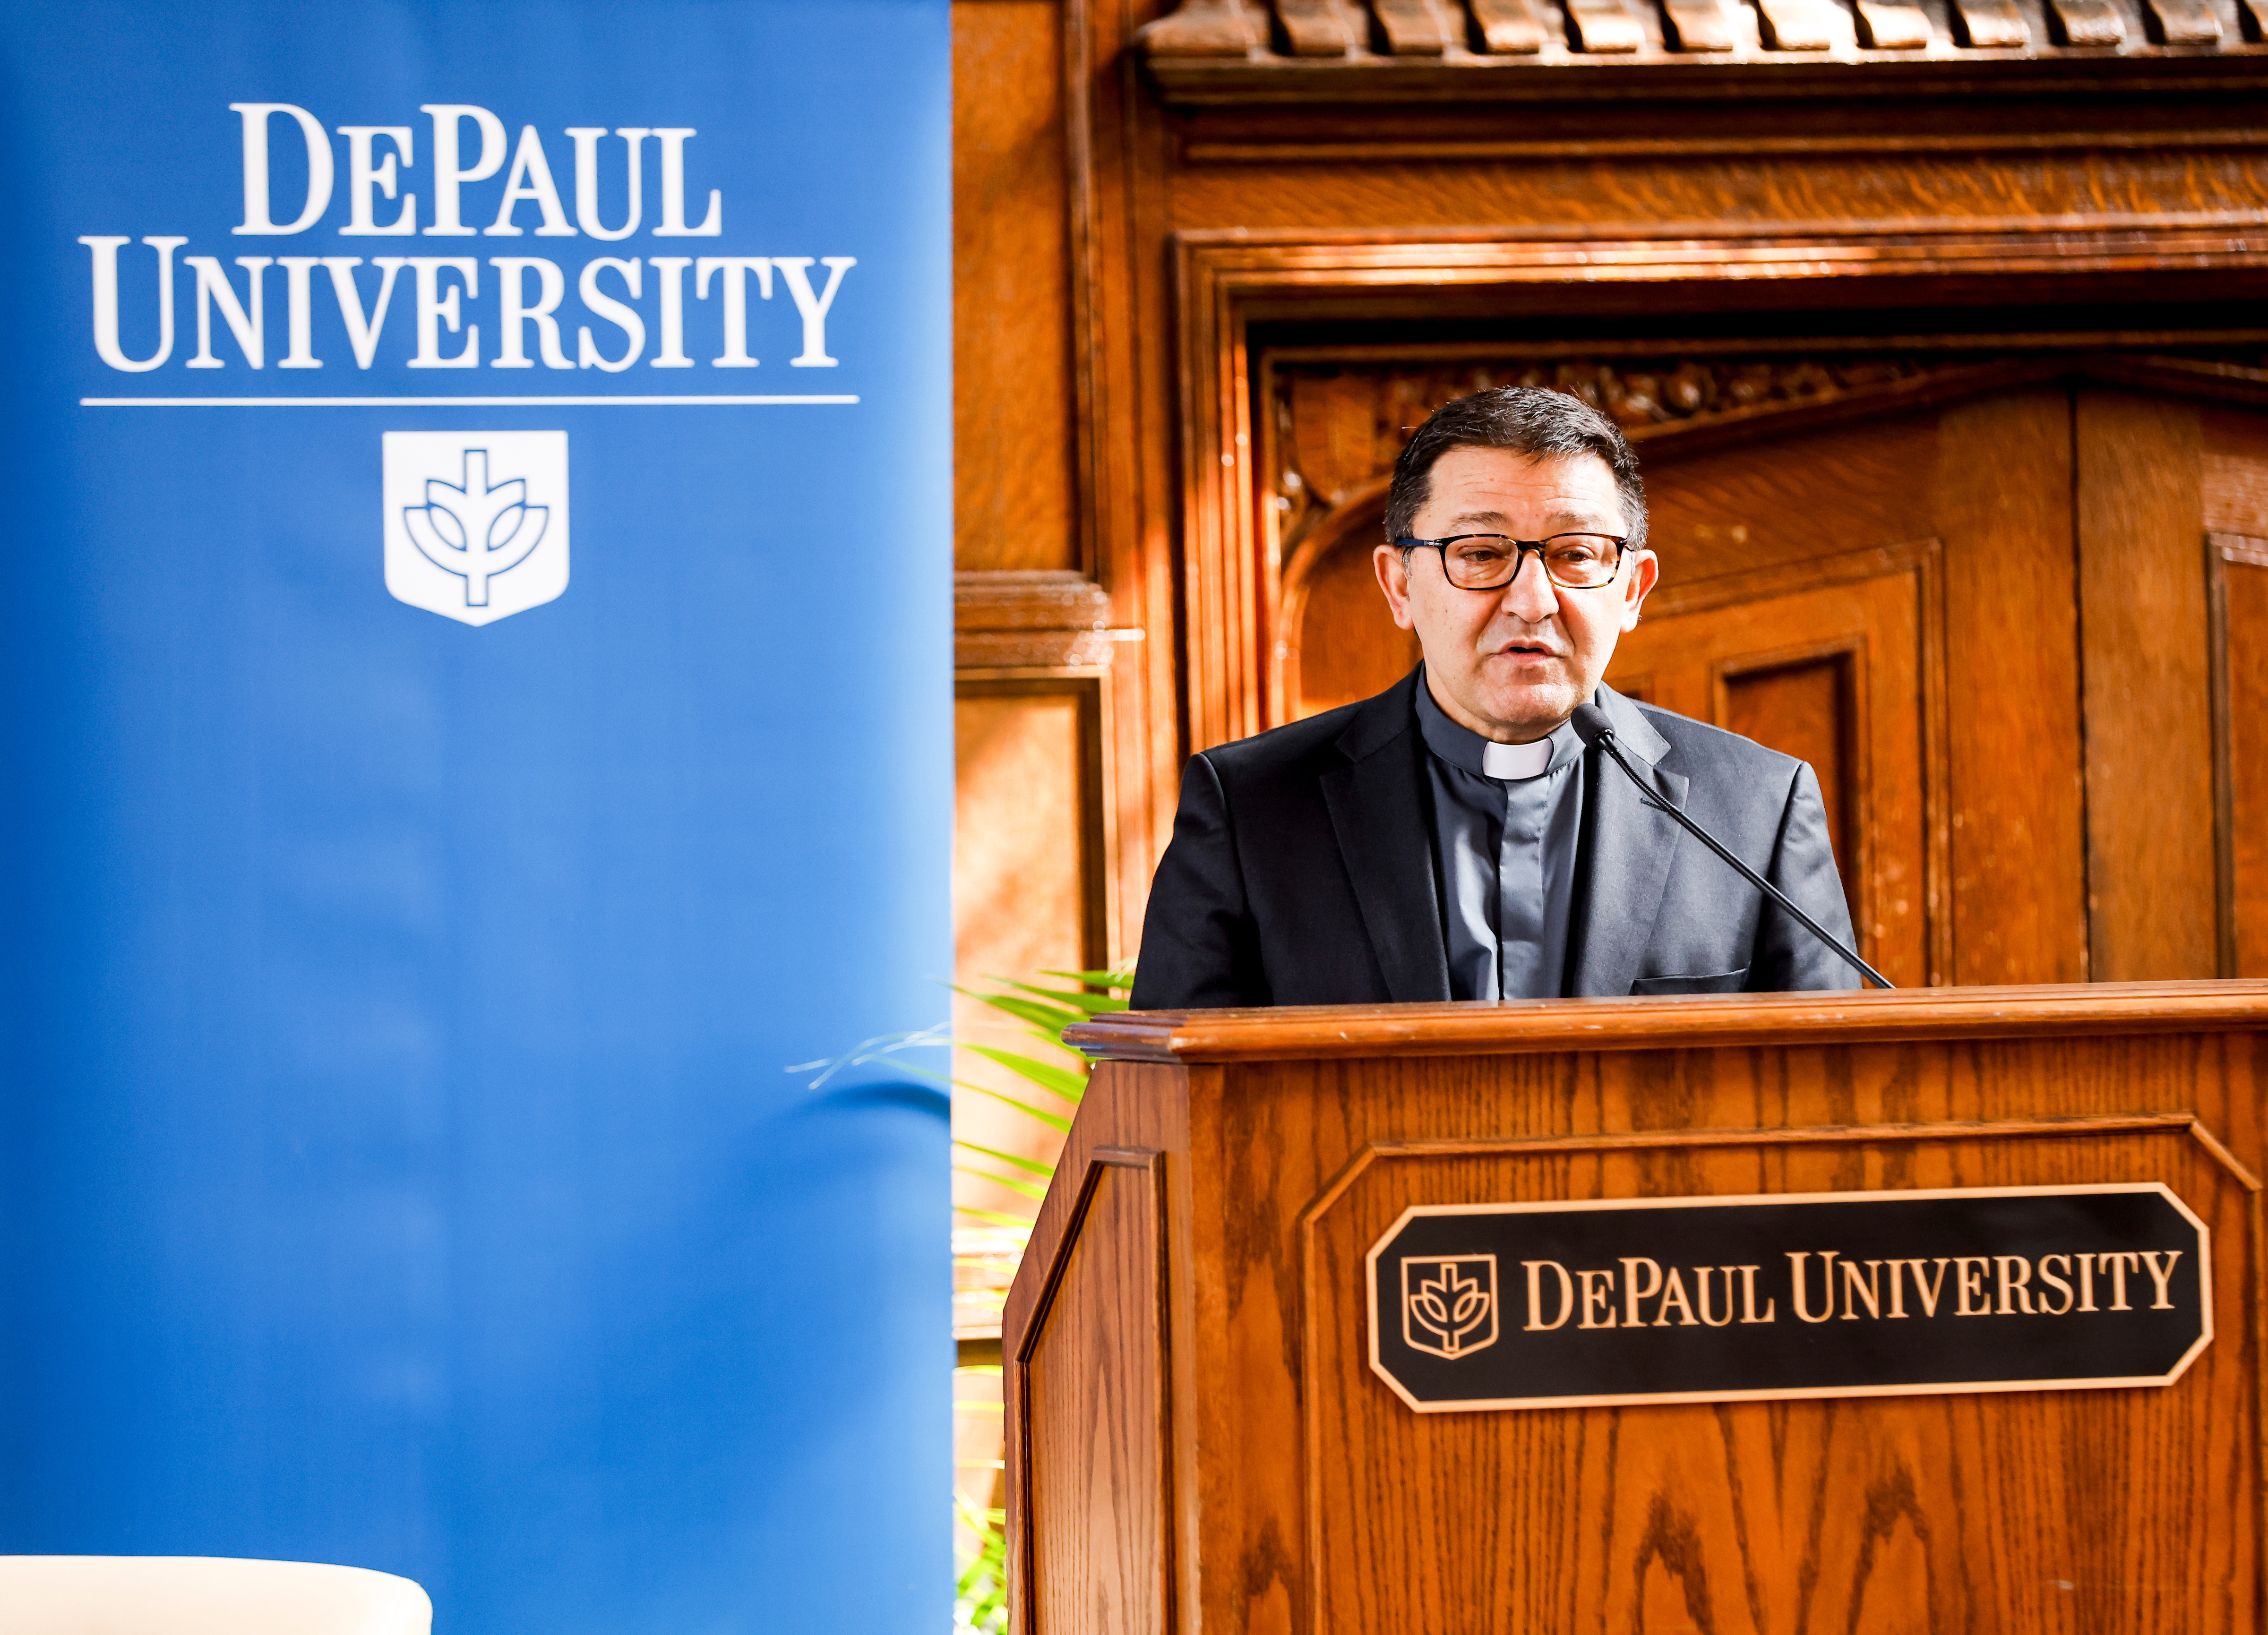 Rev. Guillermo Campuzano, C.M., vice-president for Mission and Ministry, opens the program with an invocation. (DePaul University/Steve Woltmann)